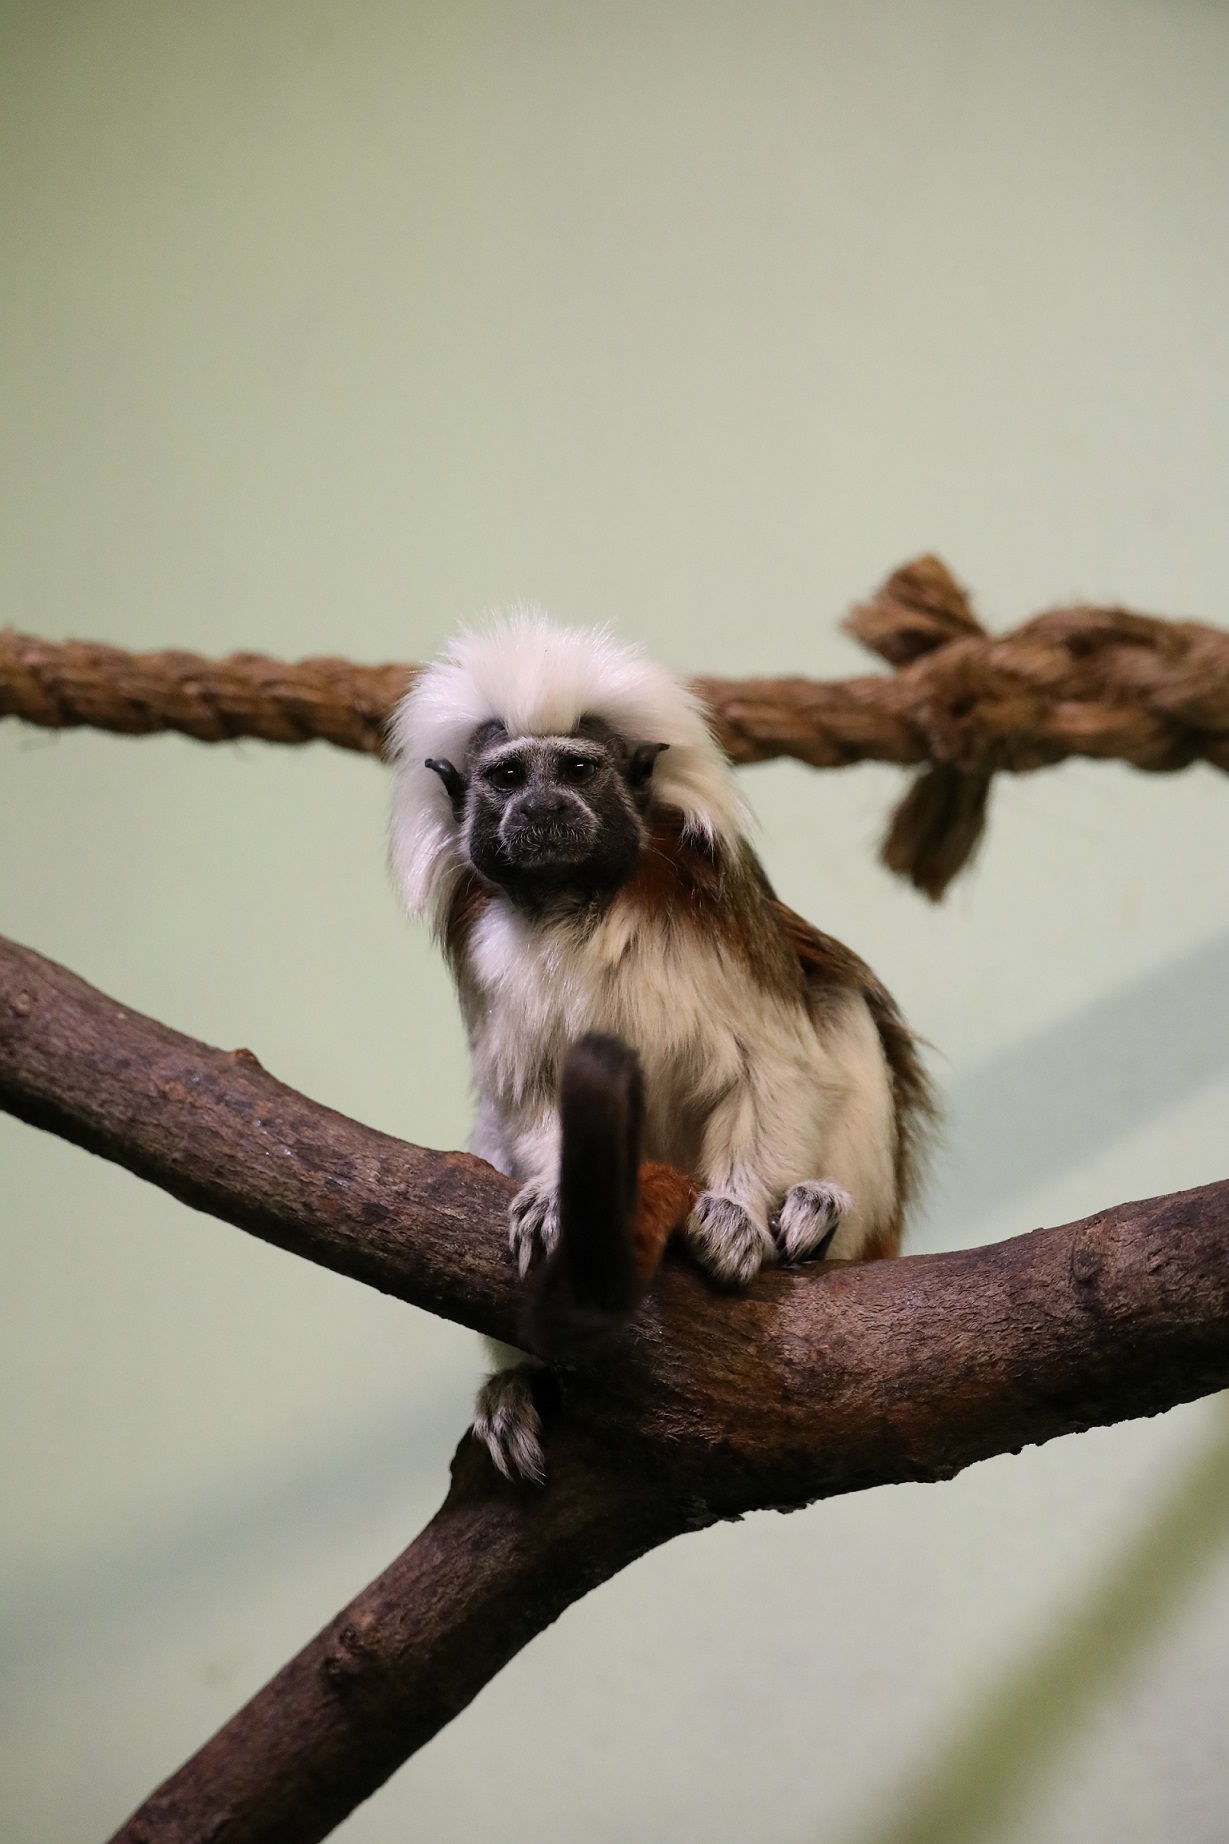 A cotton top tamarin sitting on a branch with its tail curled Image: Amy Middleton 2023